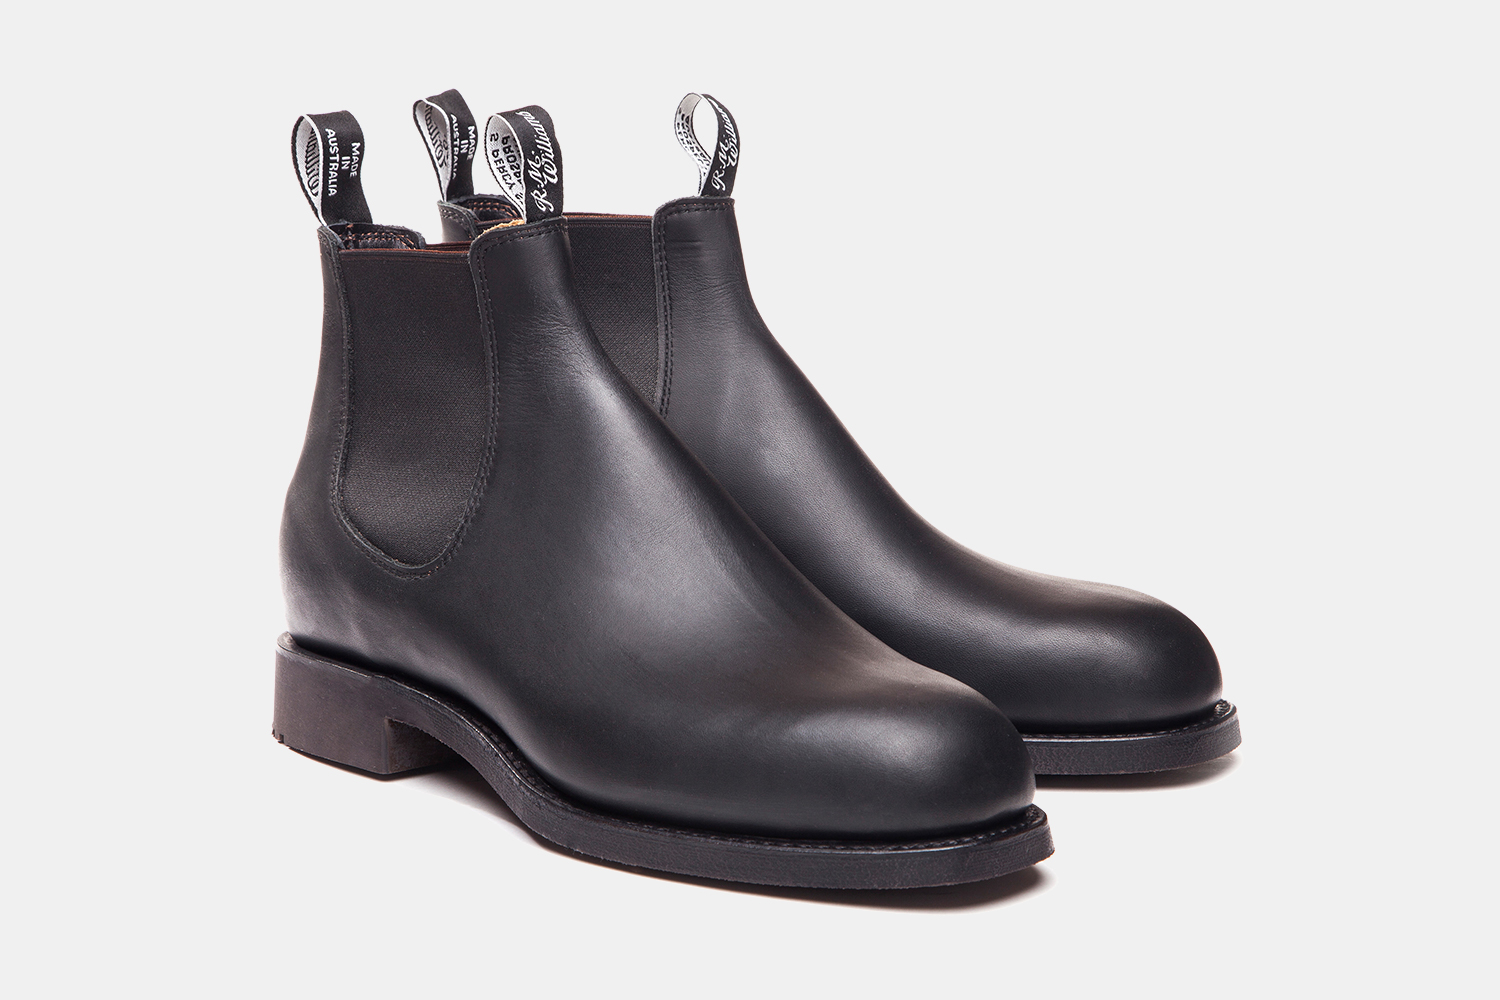 Uncrate - R.M. Williams Gardener Chelsea Boot - $299 (today only